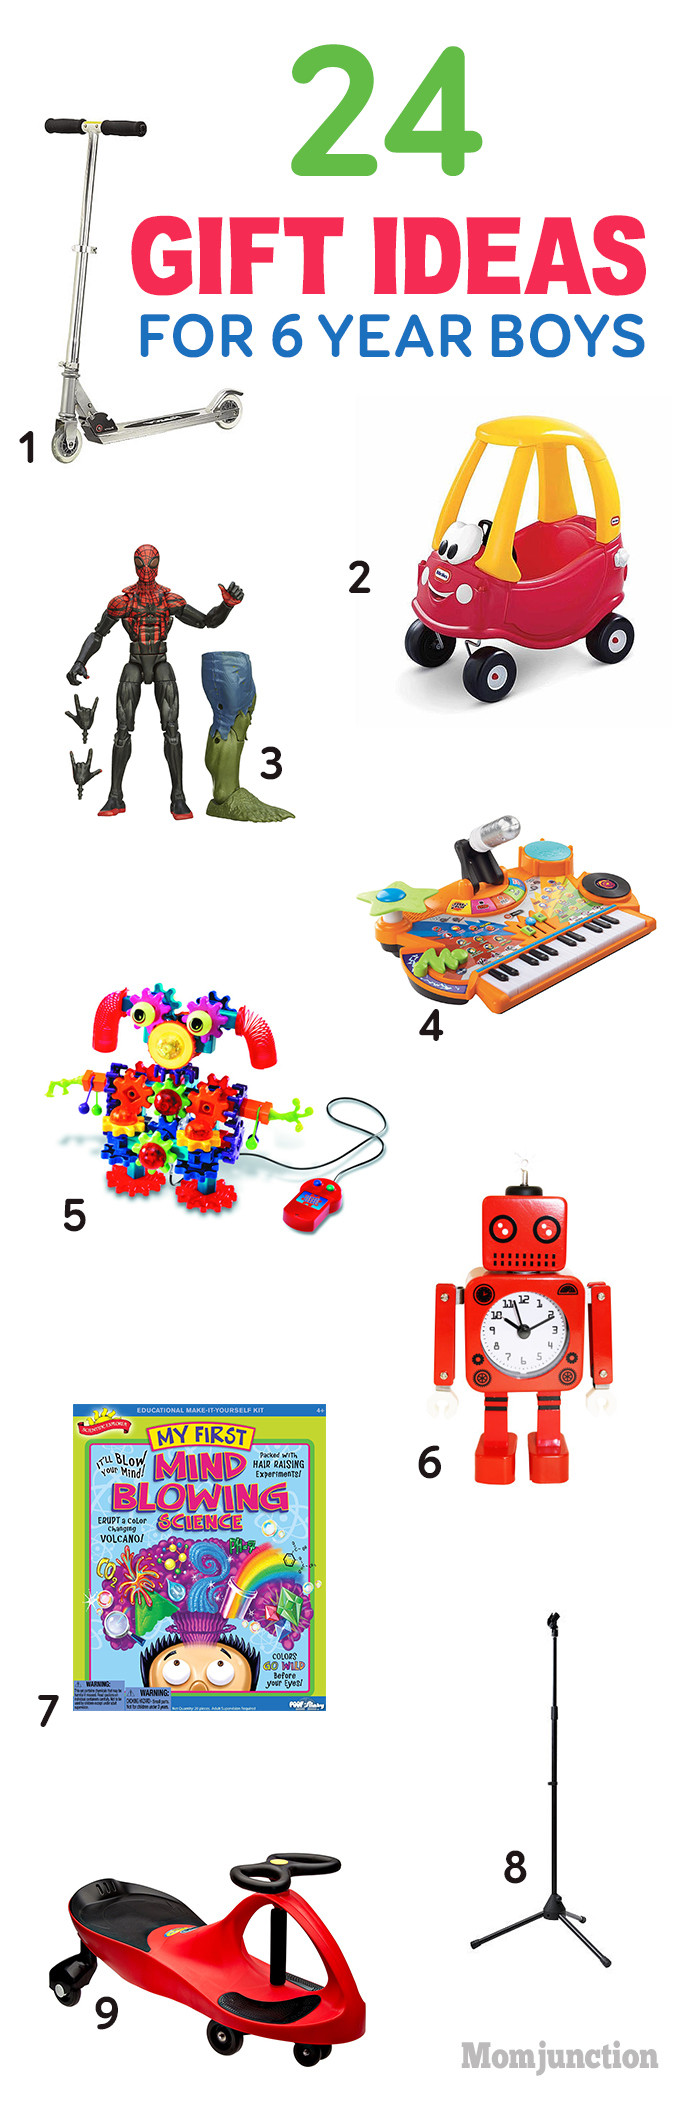 Gift Ideas For 6 Year Old Boys
 35 Best Gifts For 6 Year Old Boys In 2020